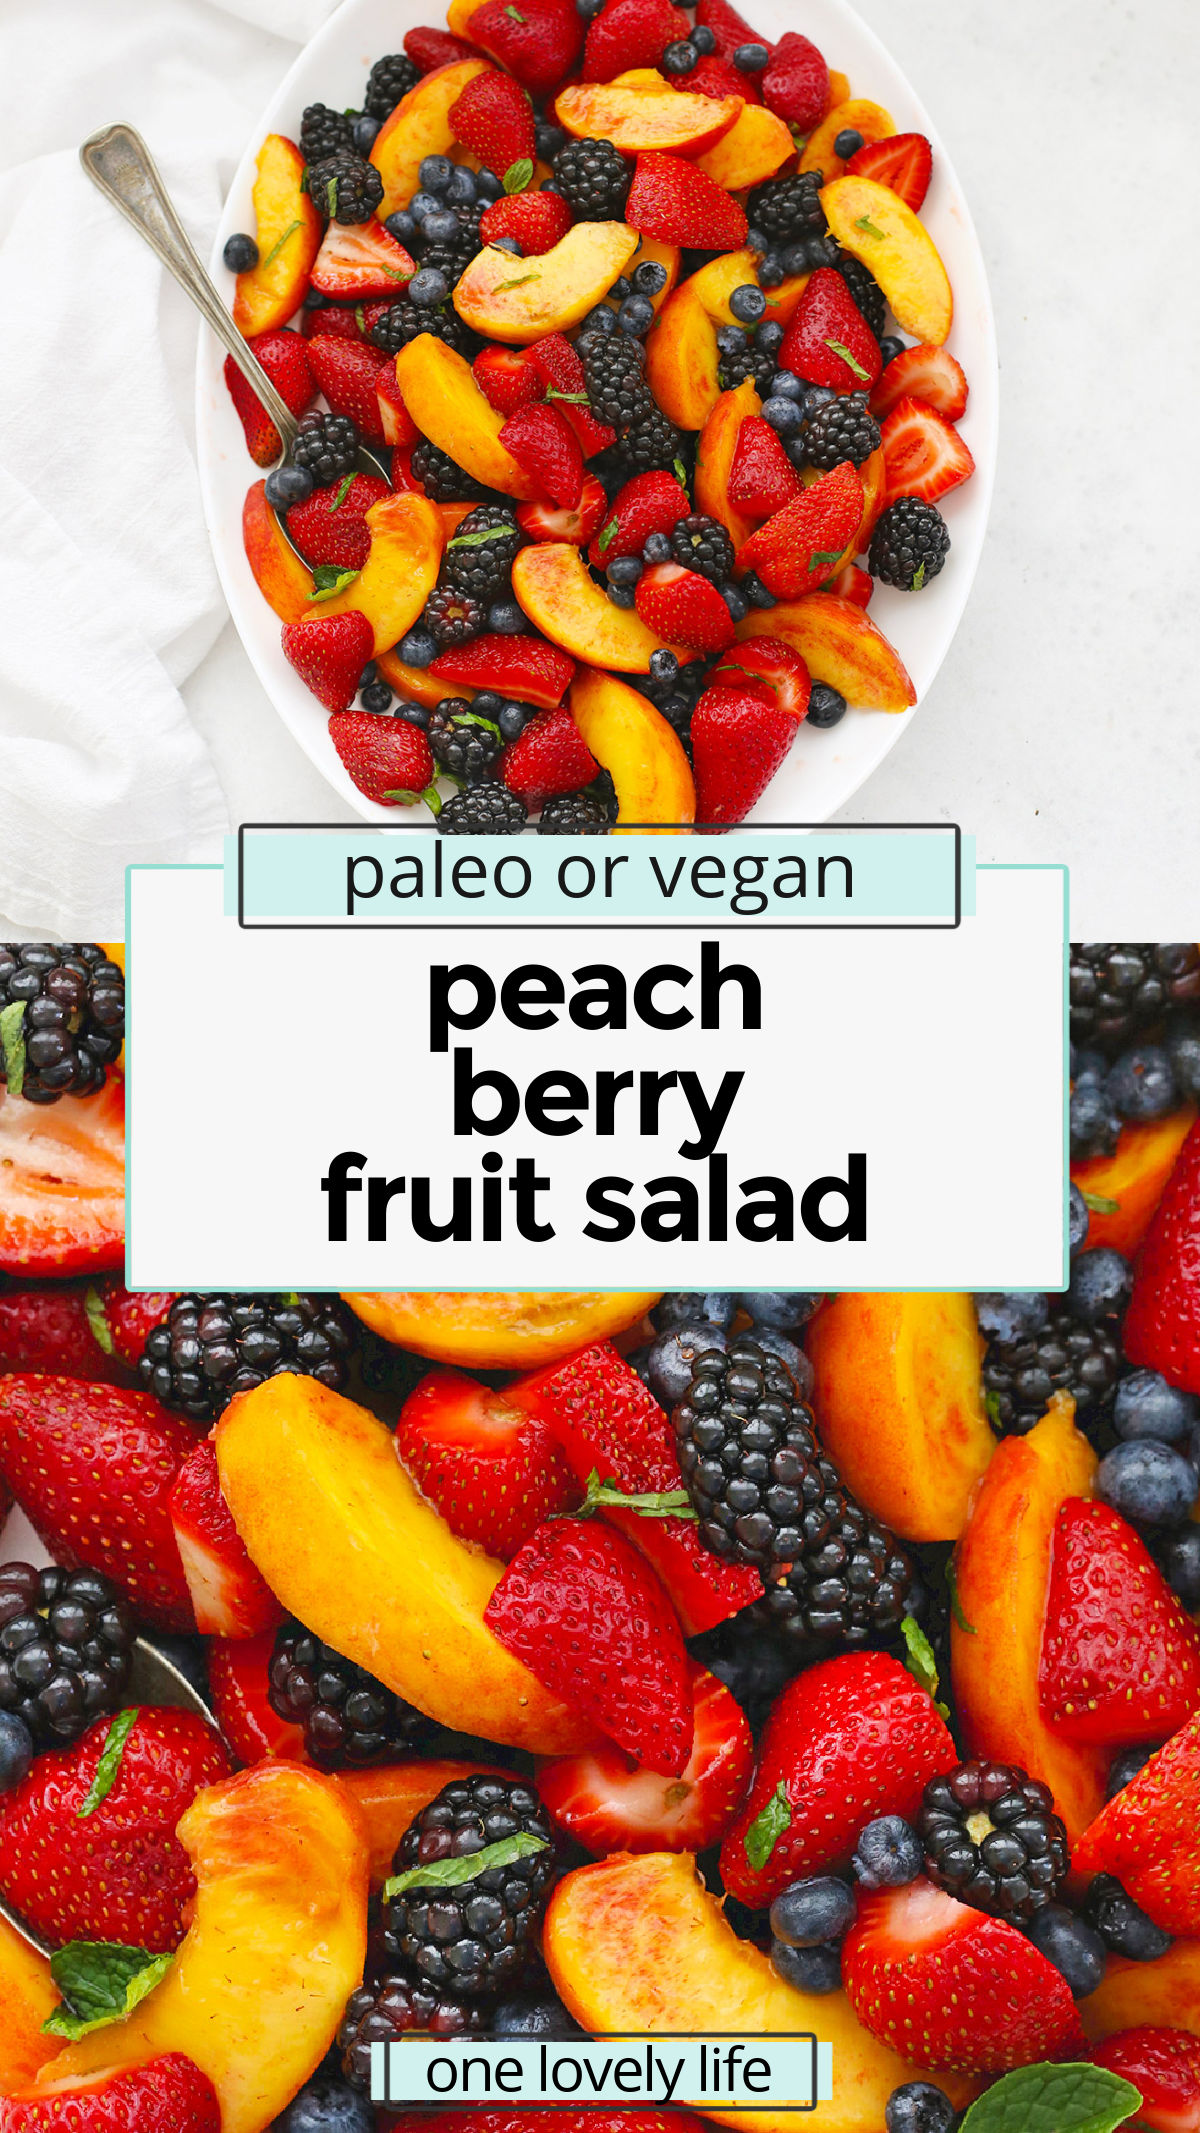 Peach Berry Fruit Salad - This summer fruit salad uses the BEST combination of fresh peaches and berries with a bright, tangy dressing to make a beautiful side dish everyone will love! (Paleo or Vegan) // Peach Fruit Salad Recipe // Summer Fruit Salad Recipe // BBQ Side Dish // Side Salad